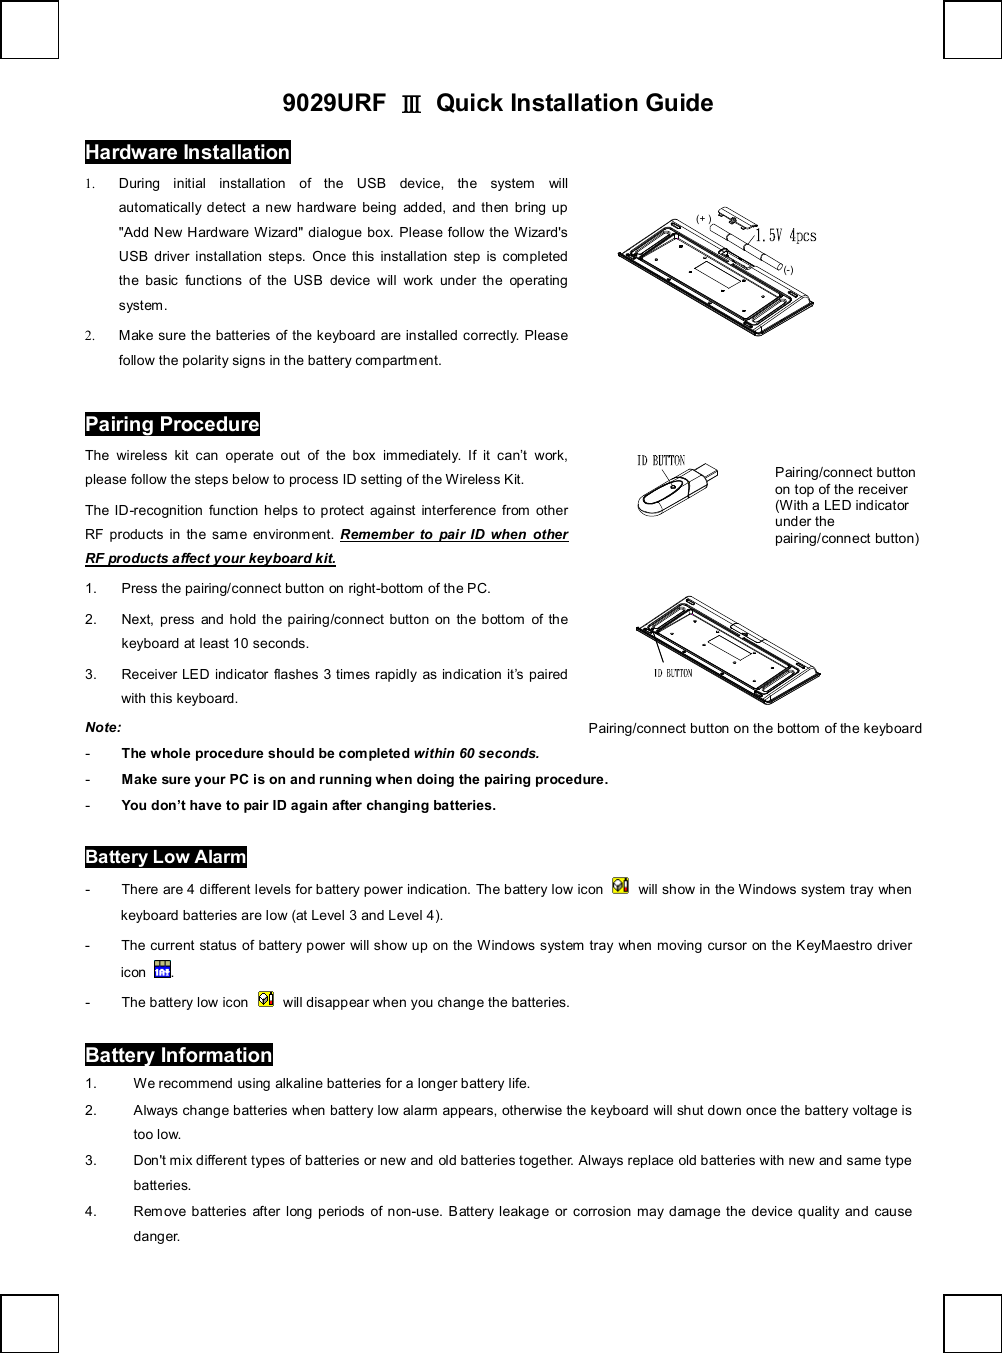   9029URF  Ⅲ Quick Installation Guide Hardware Installation                (+)(-)       1. During initial installation of the USB device, the system will automatically detect a new hardware being added, and then bring up &quot;Add New Hardware Wizard&quot; dialogue box. Please follow the Wizard&apos;s USB driver installation steps. Once this installation step is completed the basic functions of the USB device will work under the operating system. 2. Make sure the batteries of the keyboard are installed correctly. Please follow the polarity signs in the battery compartment. Pairing Procedure The wireless kit can operate out of the box immediately. If it can’t work, please follow the steps below to process ID setting of the Wireless Kit. The ID-recognition function helps to protect against interference from other RF products in the same environment.  Remember to pair ID when other RF products affect your keyboard kit. 1. Press the pairing/connect button on right-bottom of the PC.  2. Next, press and hold the pairing/connect button on the bottom of the keyboard at least 10 seconds.  3. Receiver LED indicator flashes 3 times rapidly as indication it’s paired with this keyboard.               Note:  - The whole procedure should be completed within 60 seconds. - Make sure your PC is on and running when doing the pairing procedure. - You don’t have to pair ID again after changing batteries. Battery Low Alarm - There are 4 different levels for battery power indication. The battery low icon   will show in the Windows system tray when keyboard batteries are low (at Level 3 and Level 4). - The current status of battery power will show up on the Windows system tray when moving cursor on the KeyMaestro driver icon  . - The battery low icon   will disappear when you change the batteries. Battery Information 1. We recommend using alkaline batteries for a longer battery life. 2. Always change batteries when battery low alarm appears, otherwise the keyboard will shut down once the battery voltage is too low. 3. Don&apos;t mix different types of batteries or new and old batteries together. Always replace old batteries with new and same type batteries. 4. Remove batteries after long periods of non-use. Battery leakage or corrosion may damage the device quality and cause danger.  Pairing/connect button on the bottom of the keyboard  Pairing/connect button on top of the receiver (With a LED indicator under the pairing/connect button) 